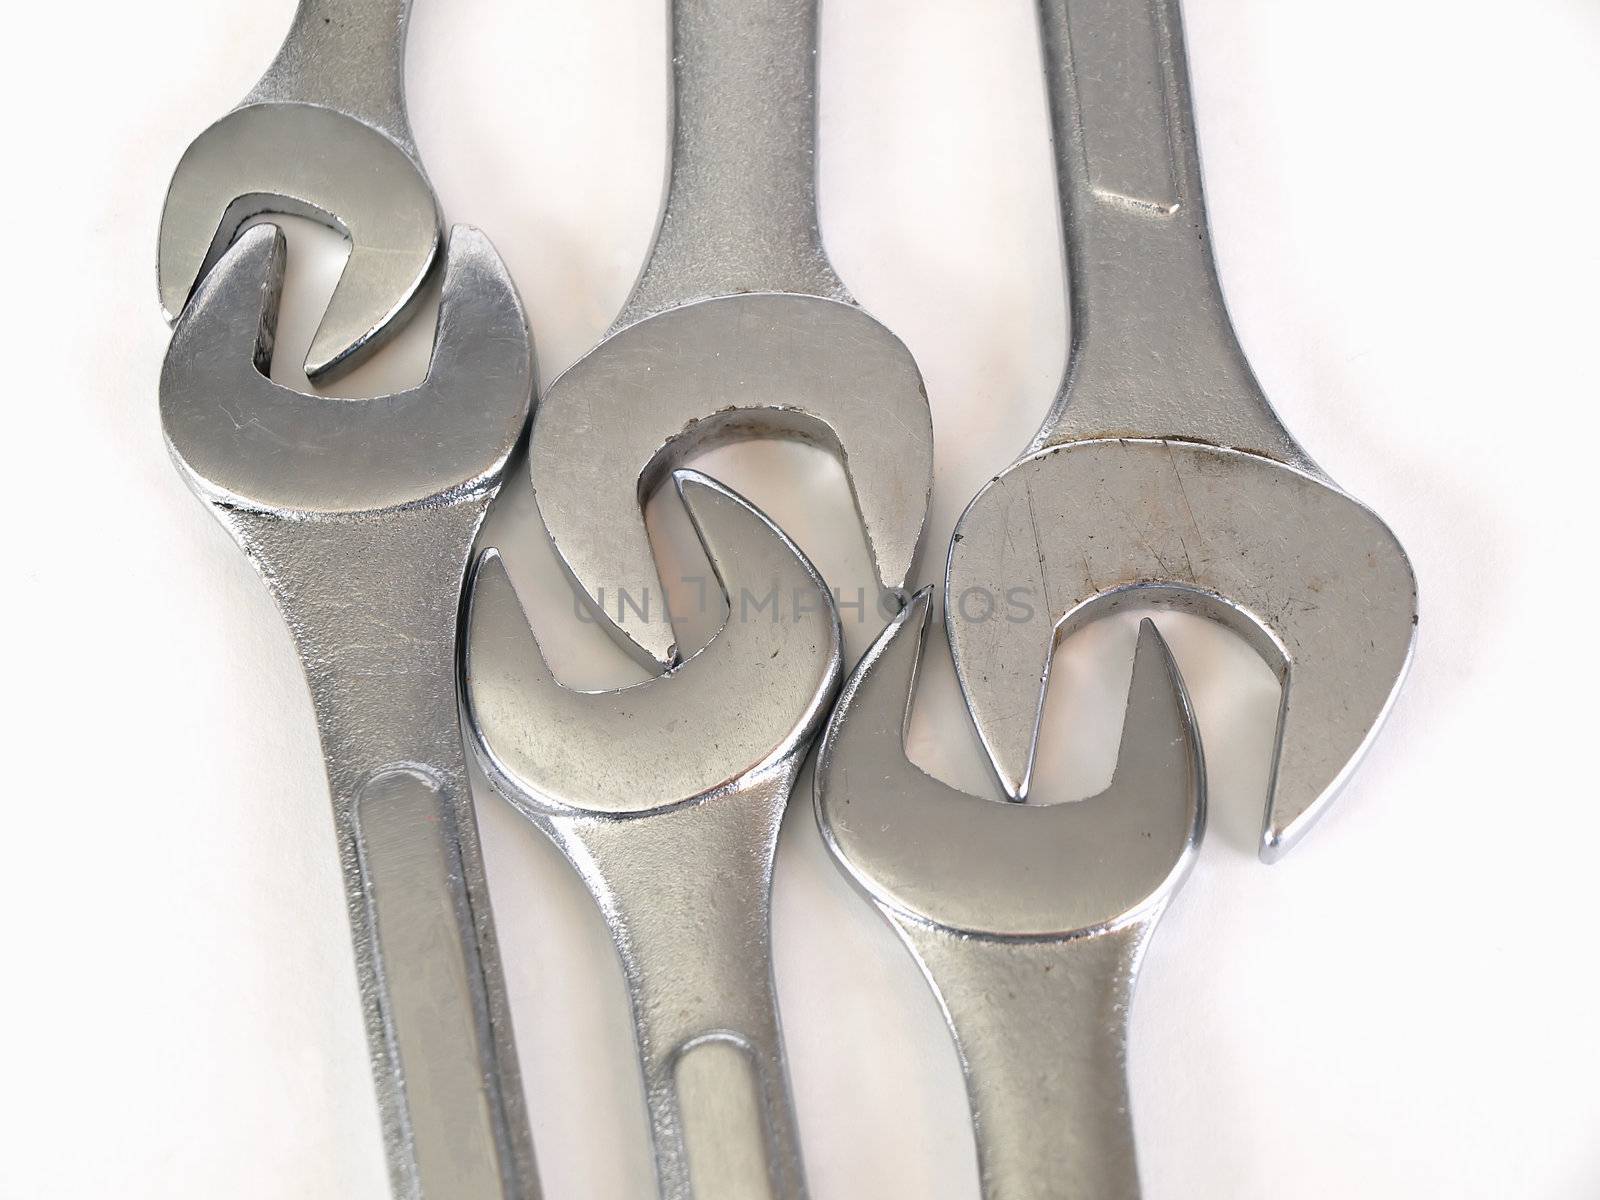 Six crescent wrenches, interlocked, on a solid white background.